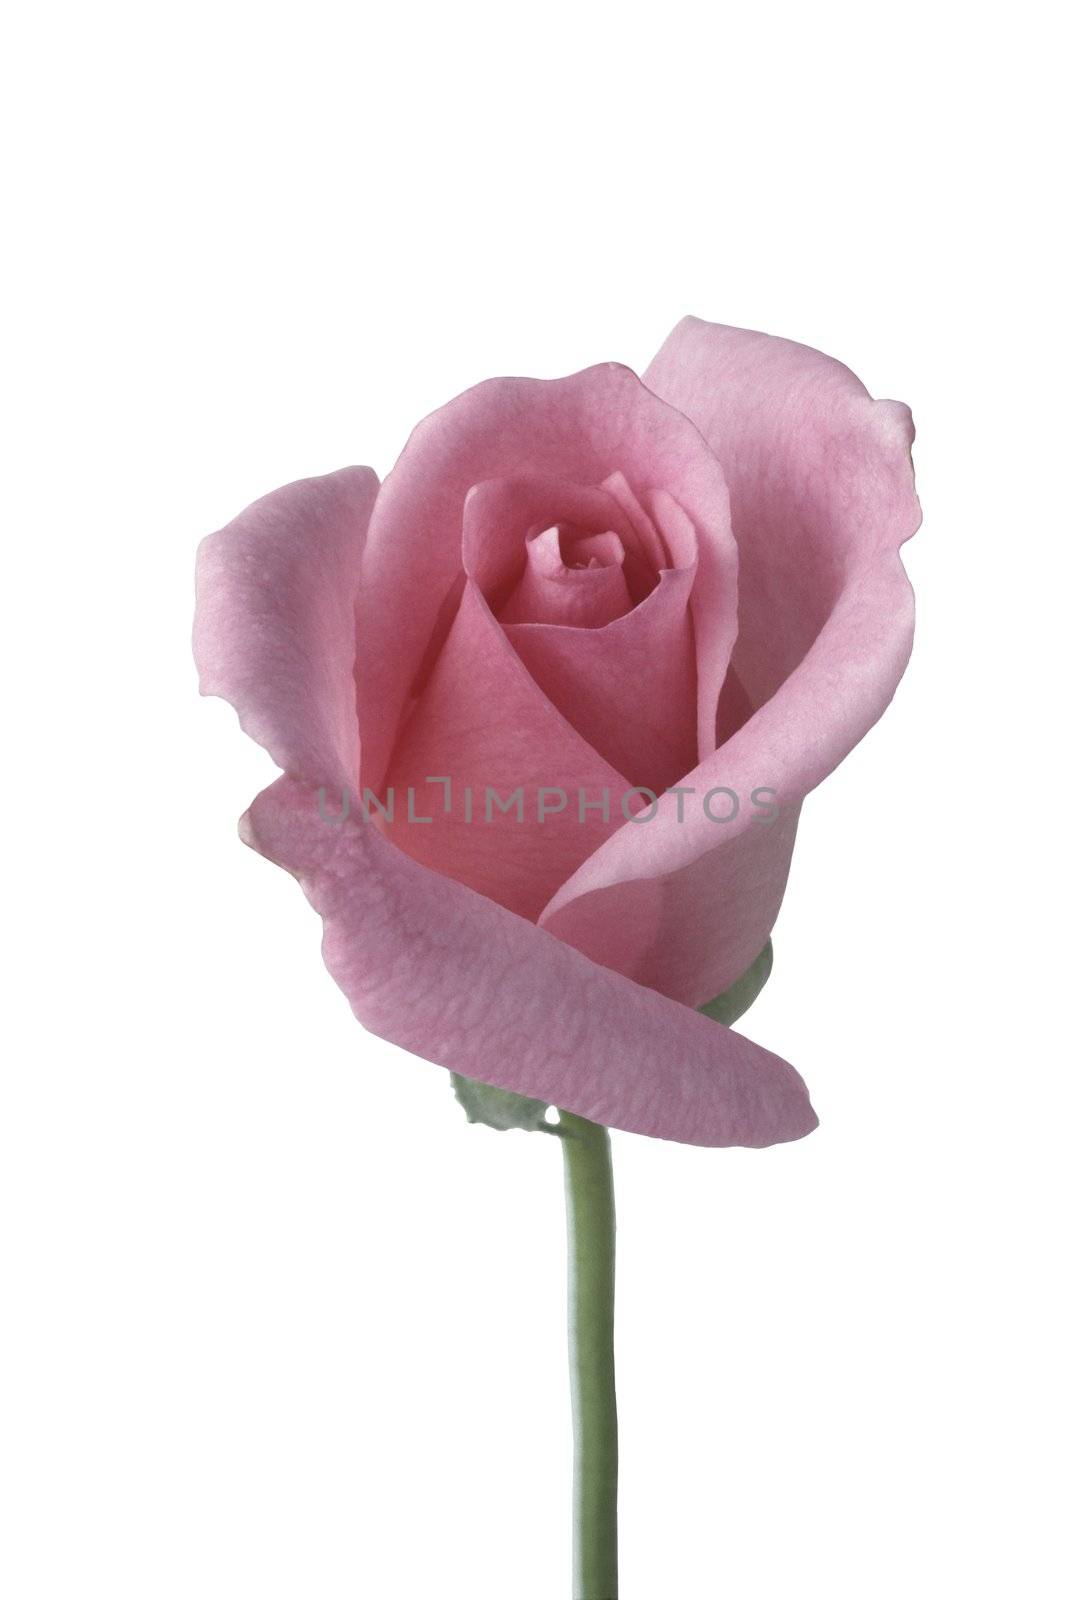 Single pink rose against white background